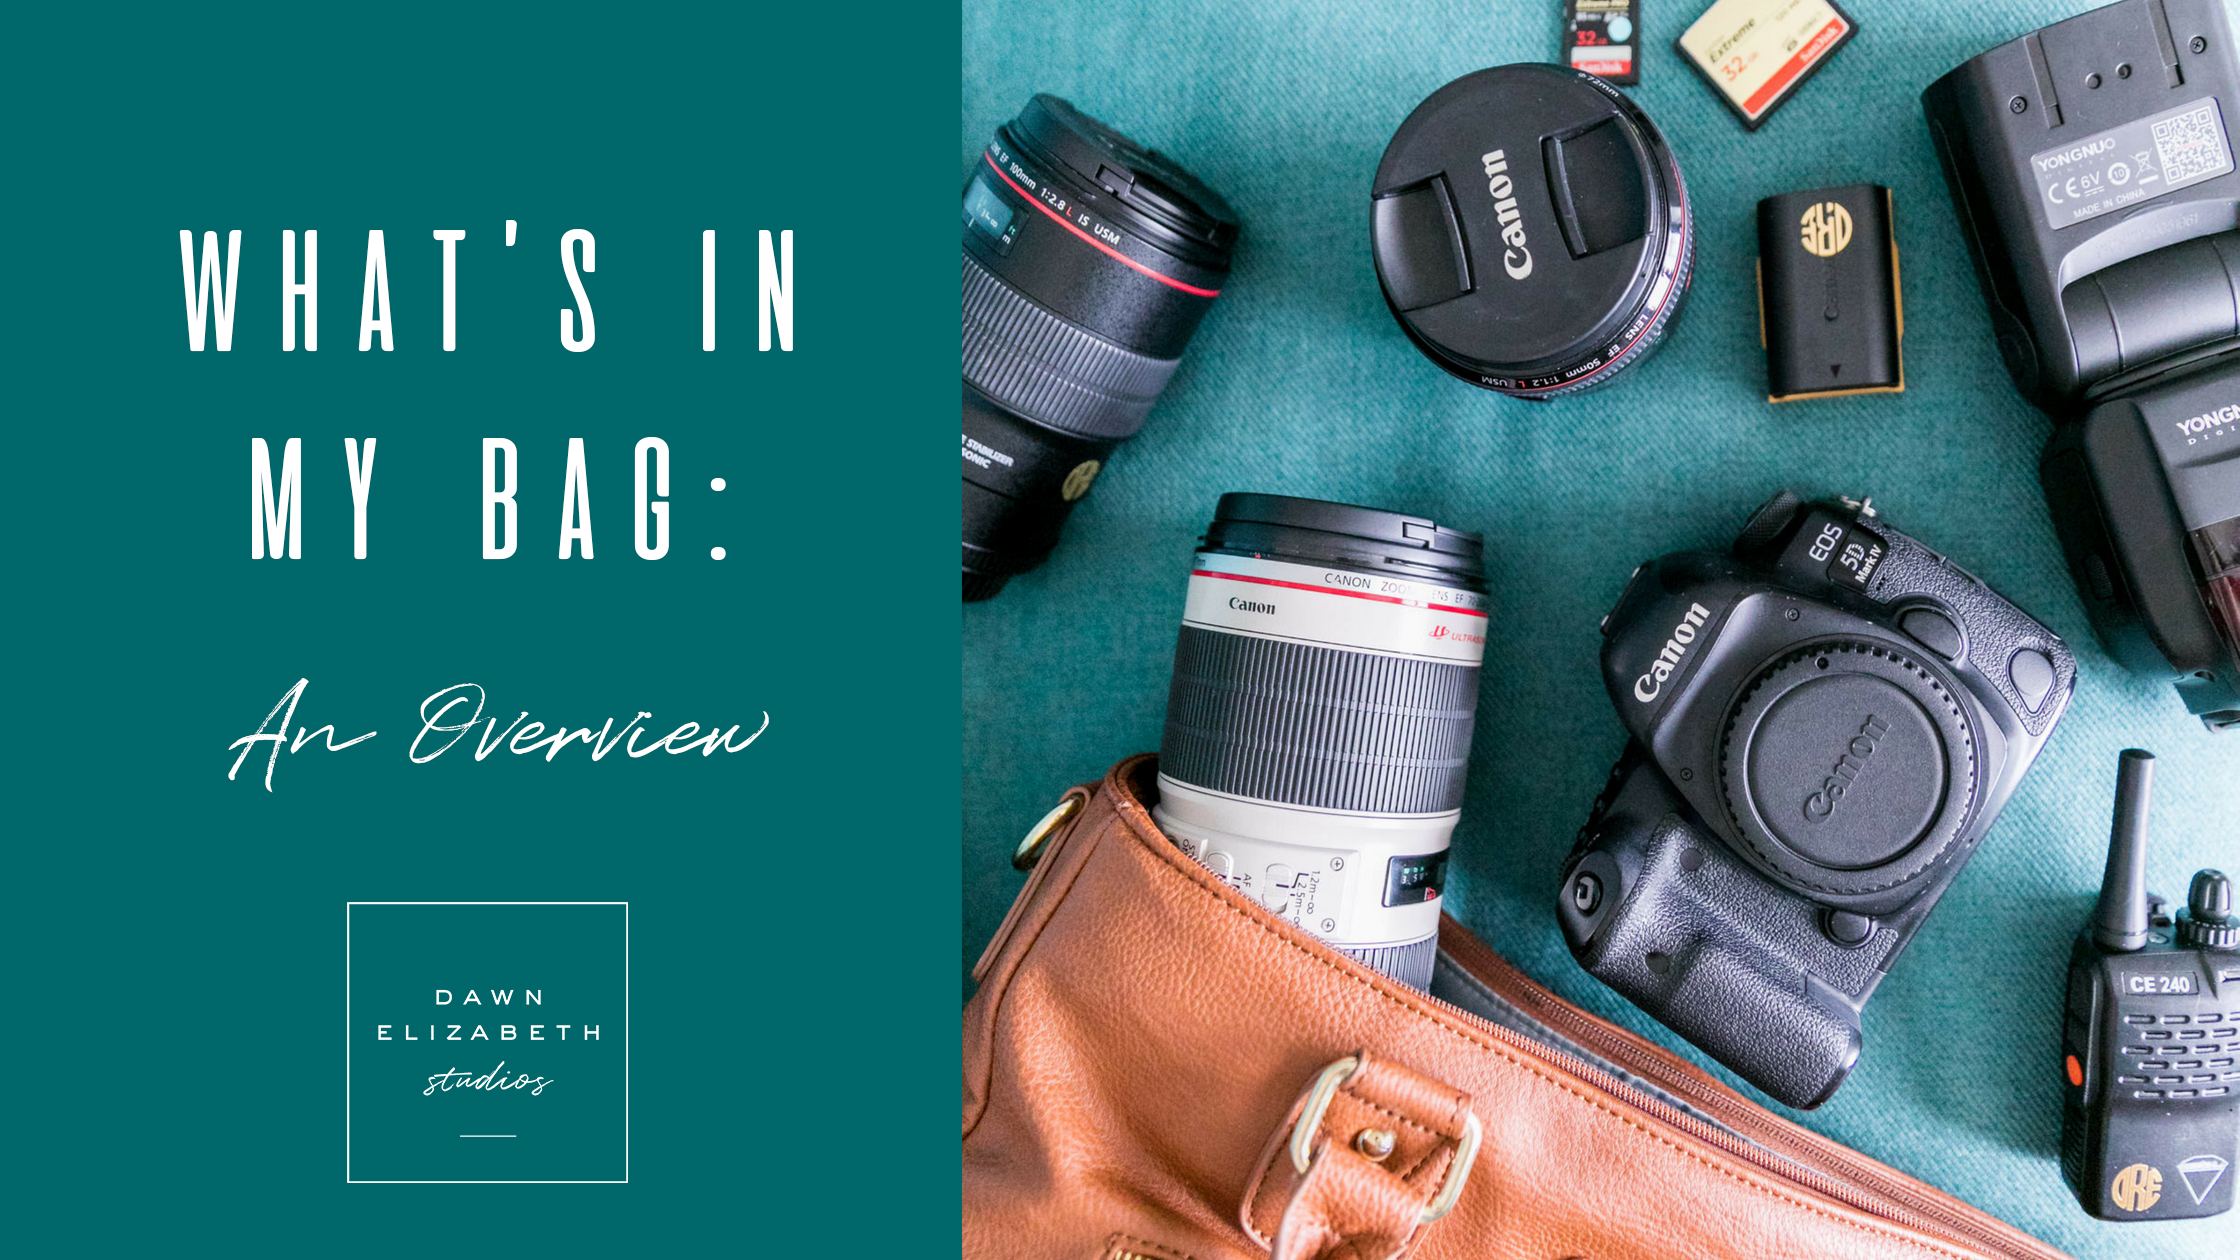 What's in my bag - An Overview by Dawn Elizabeth Studios, a San Antonio Based Wedding Photographer. Dawn shares her favorite Canon cameras, lenses and accesories